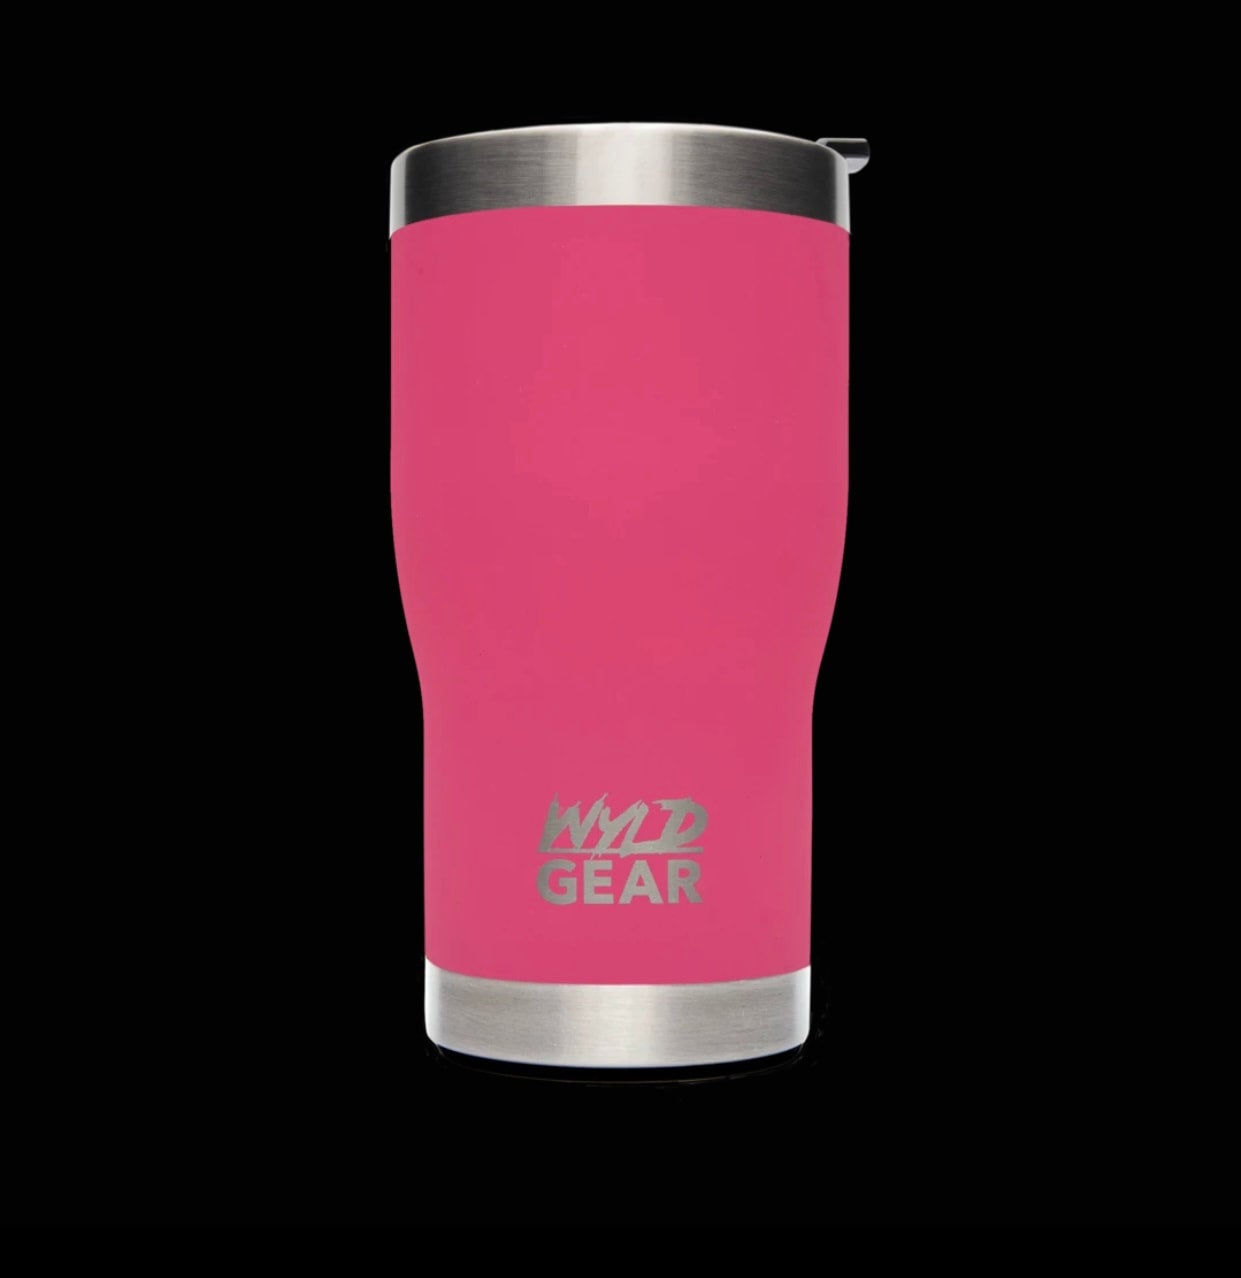 16 oz Stainless Steel Party Cup Tumbler - The Wyld Cup™ - Wyld Gear